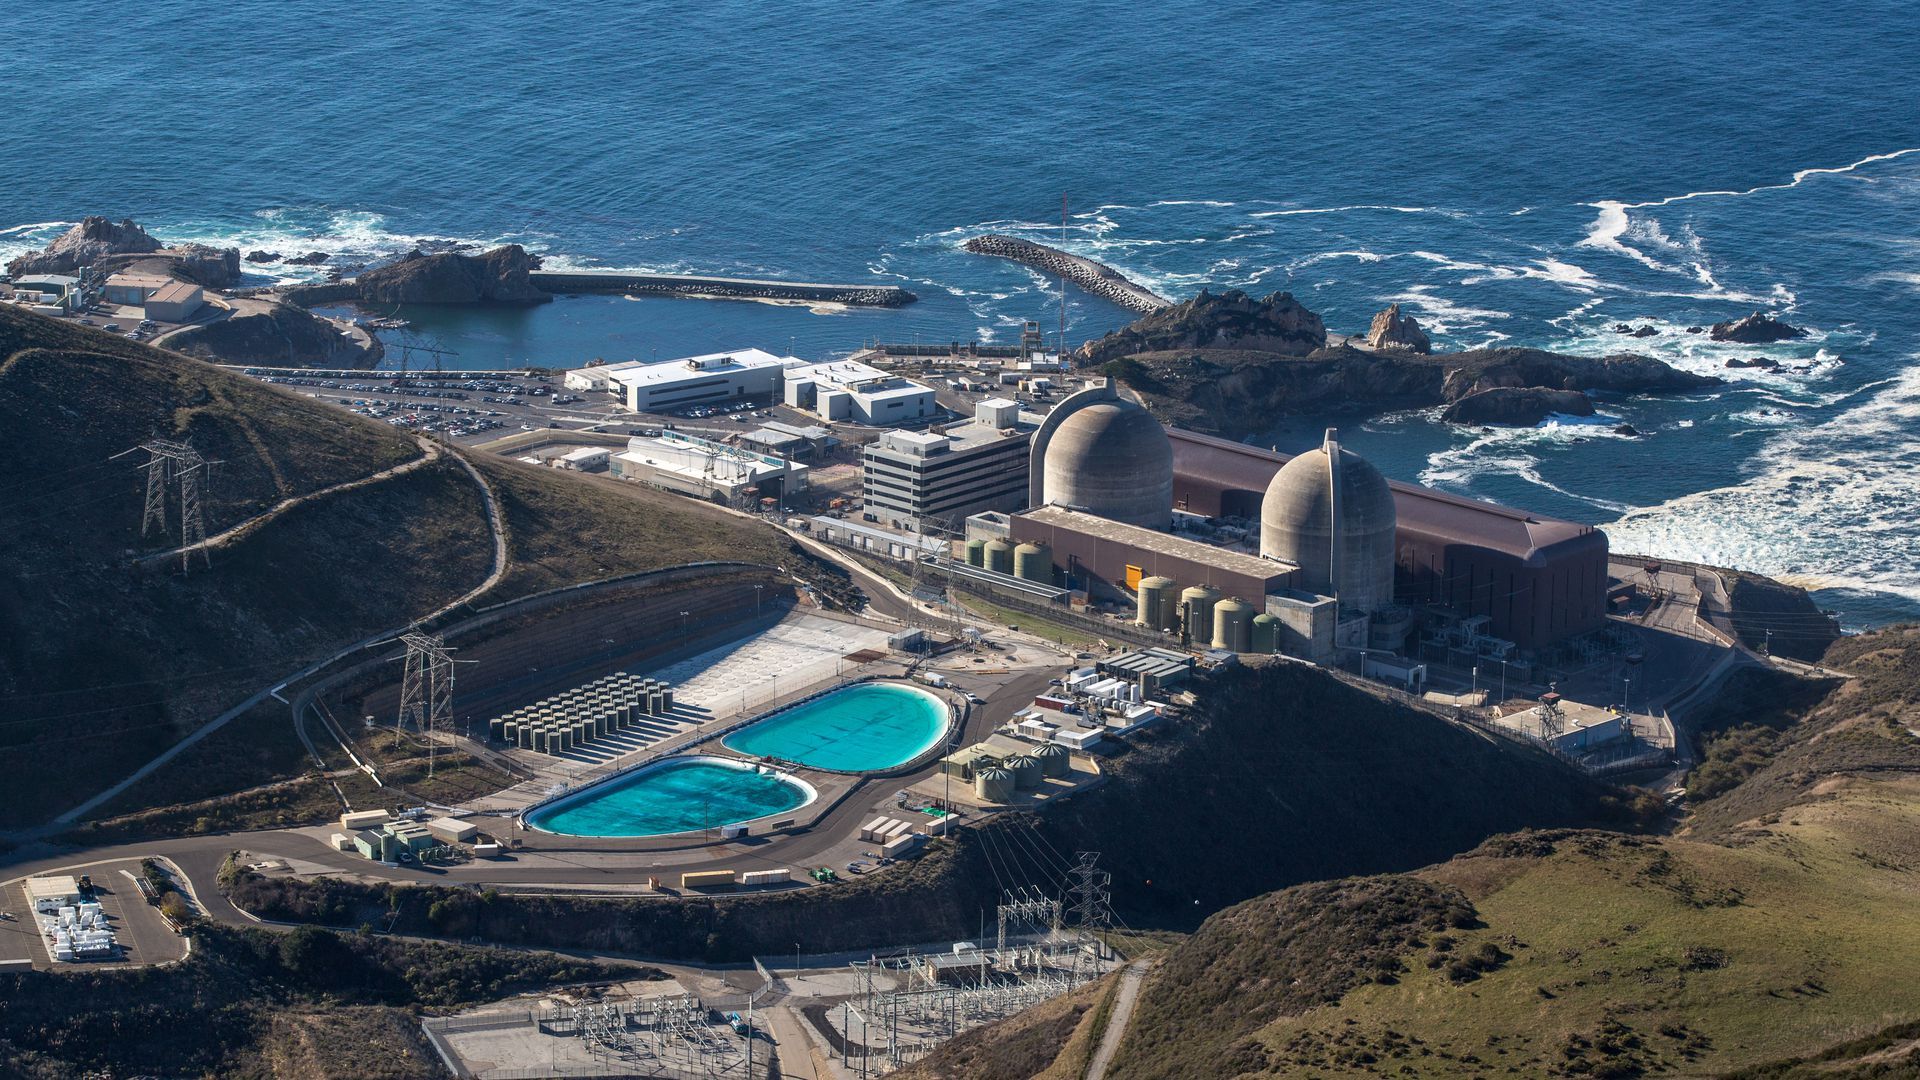 Diablo Canyon, the only operational nuclear plant left in California, produced nearly 8.5% of the state's electricity in 2020. It was slated to be shut down by 2025.